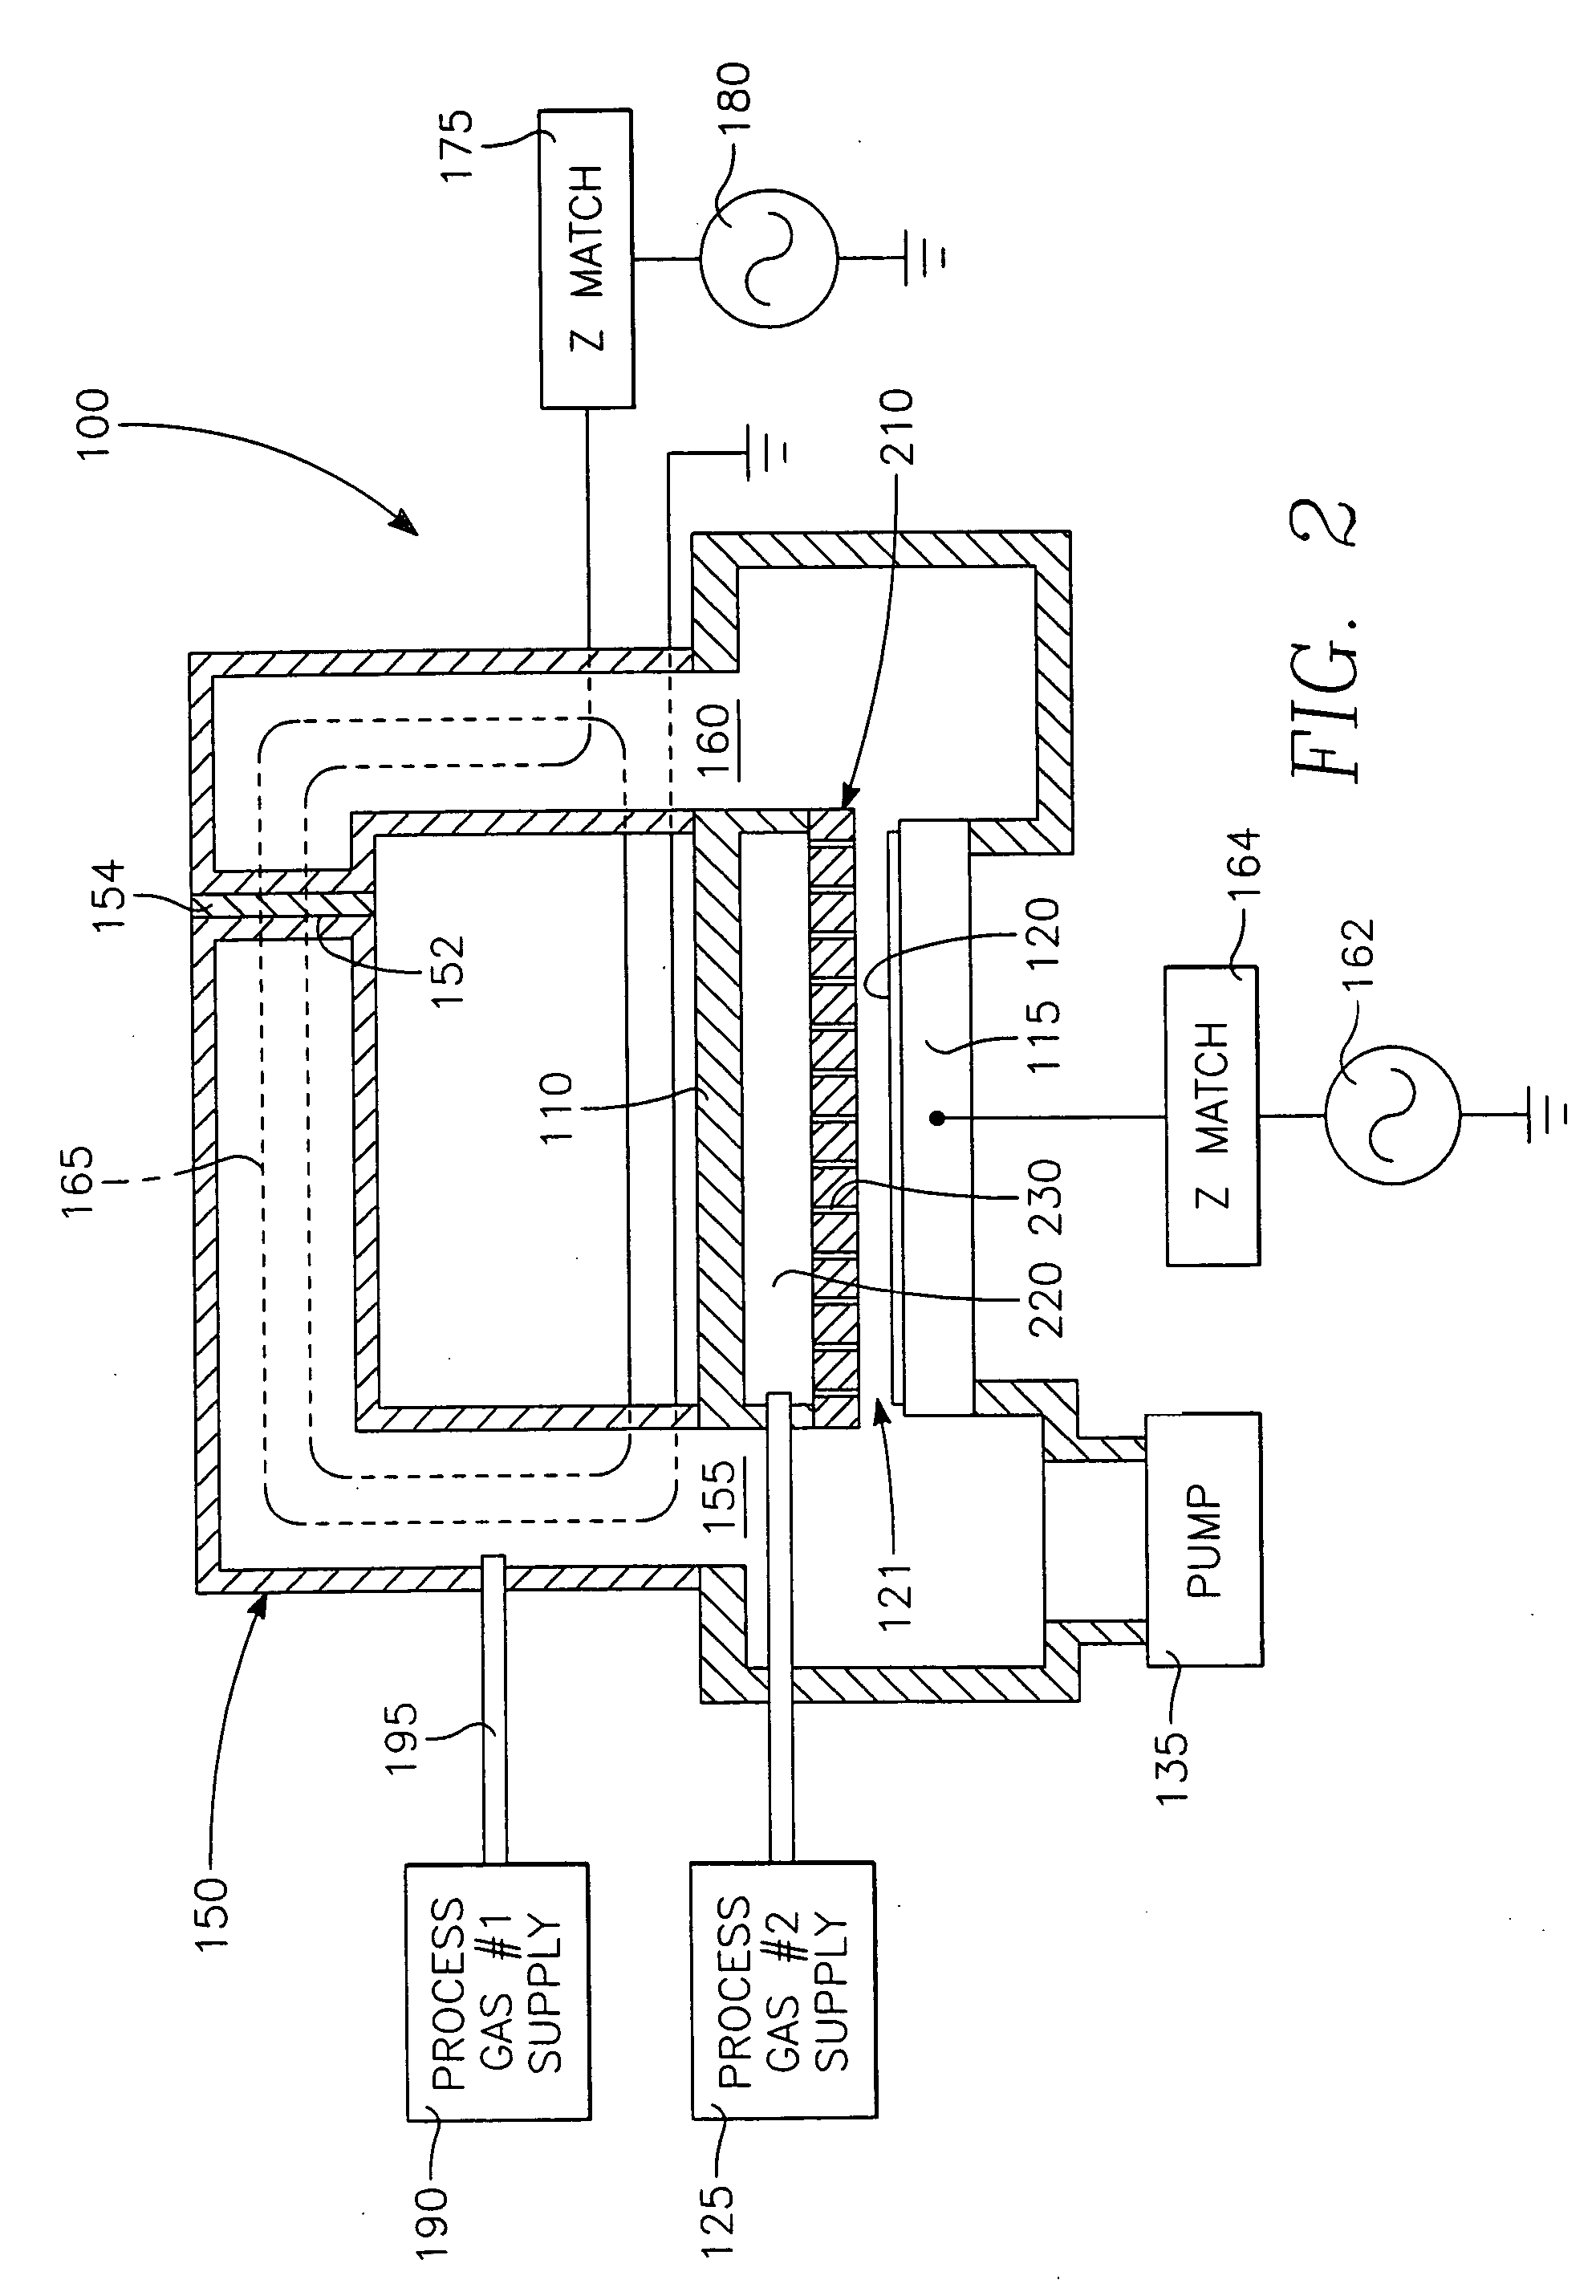 Plasma immersion ion implantation system including an inductively coupled plasma source having low dissociation and low minimum plasma voltage